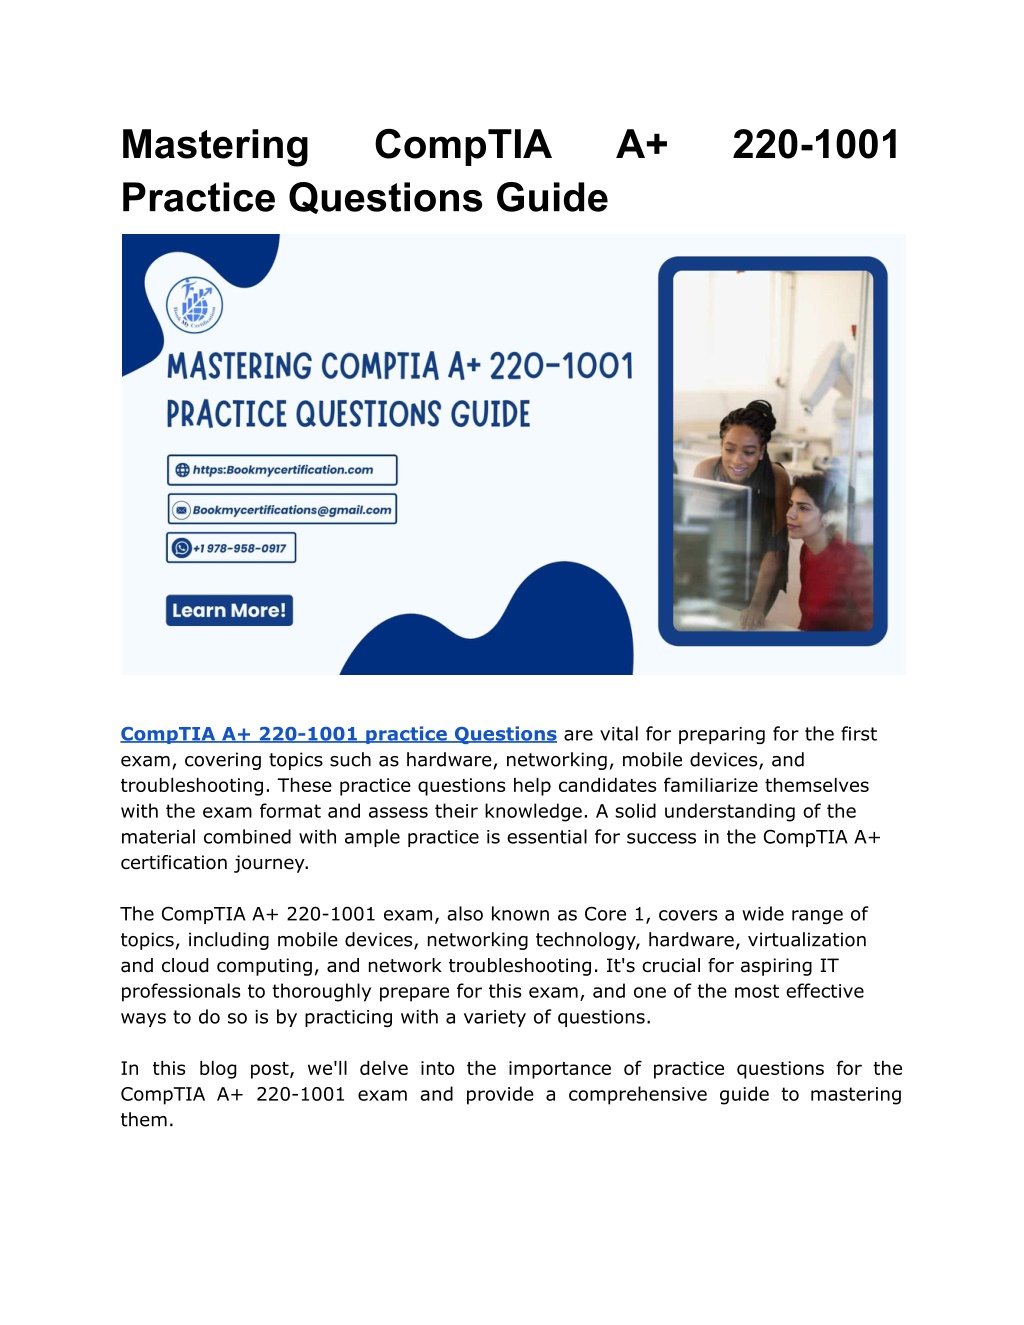 Ppt Mastering Comptia A Practice Questions Guide Powerpoint